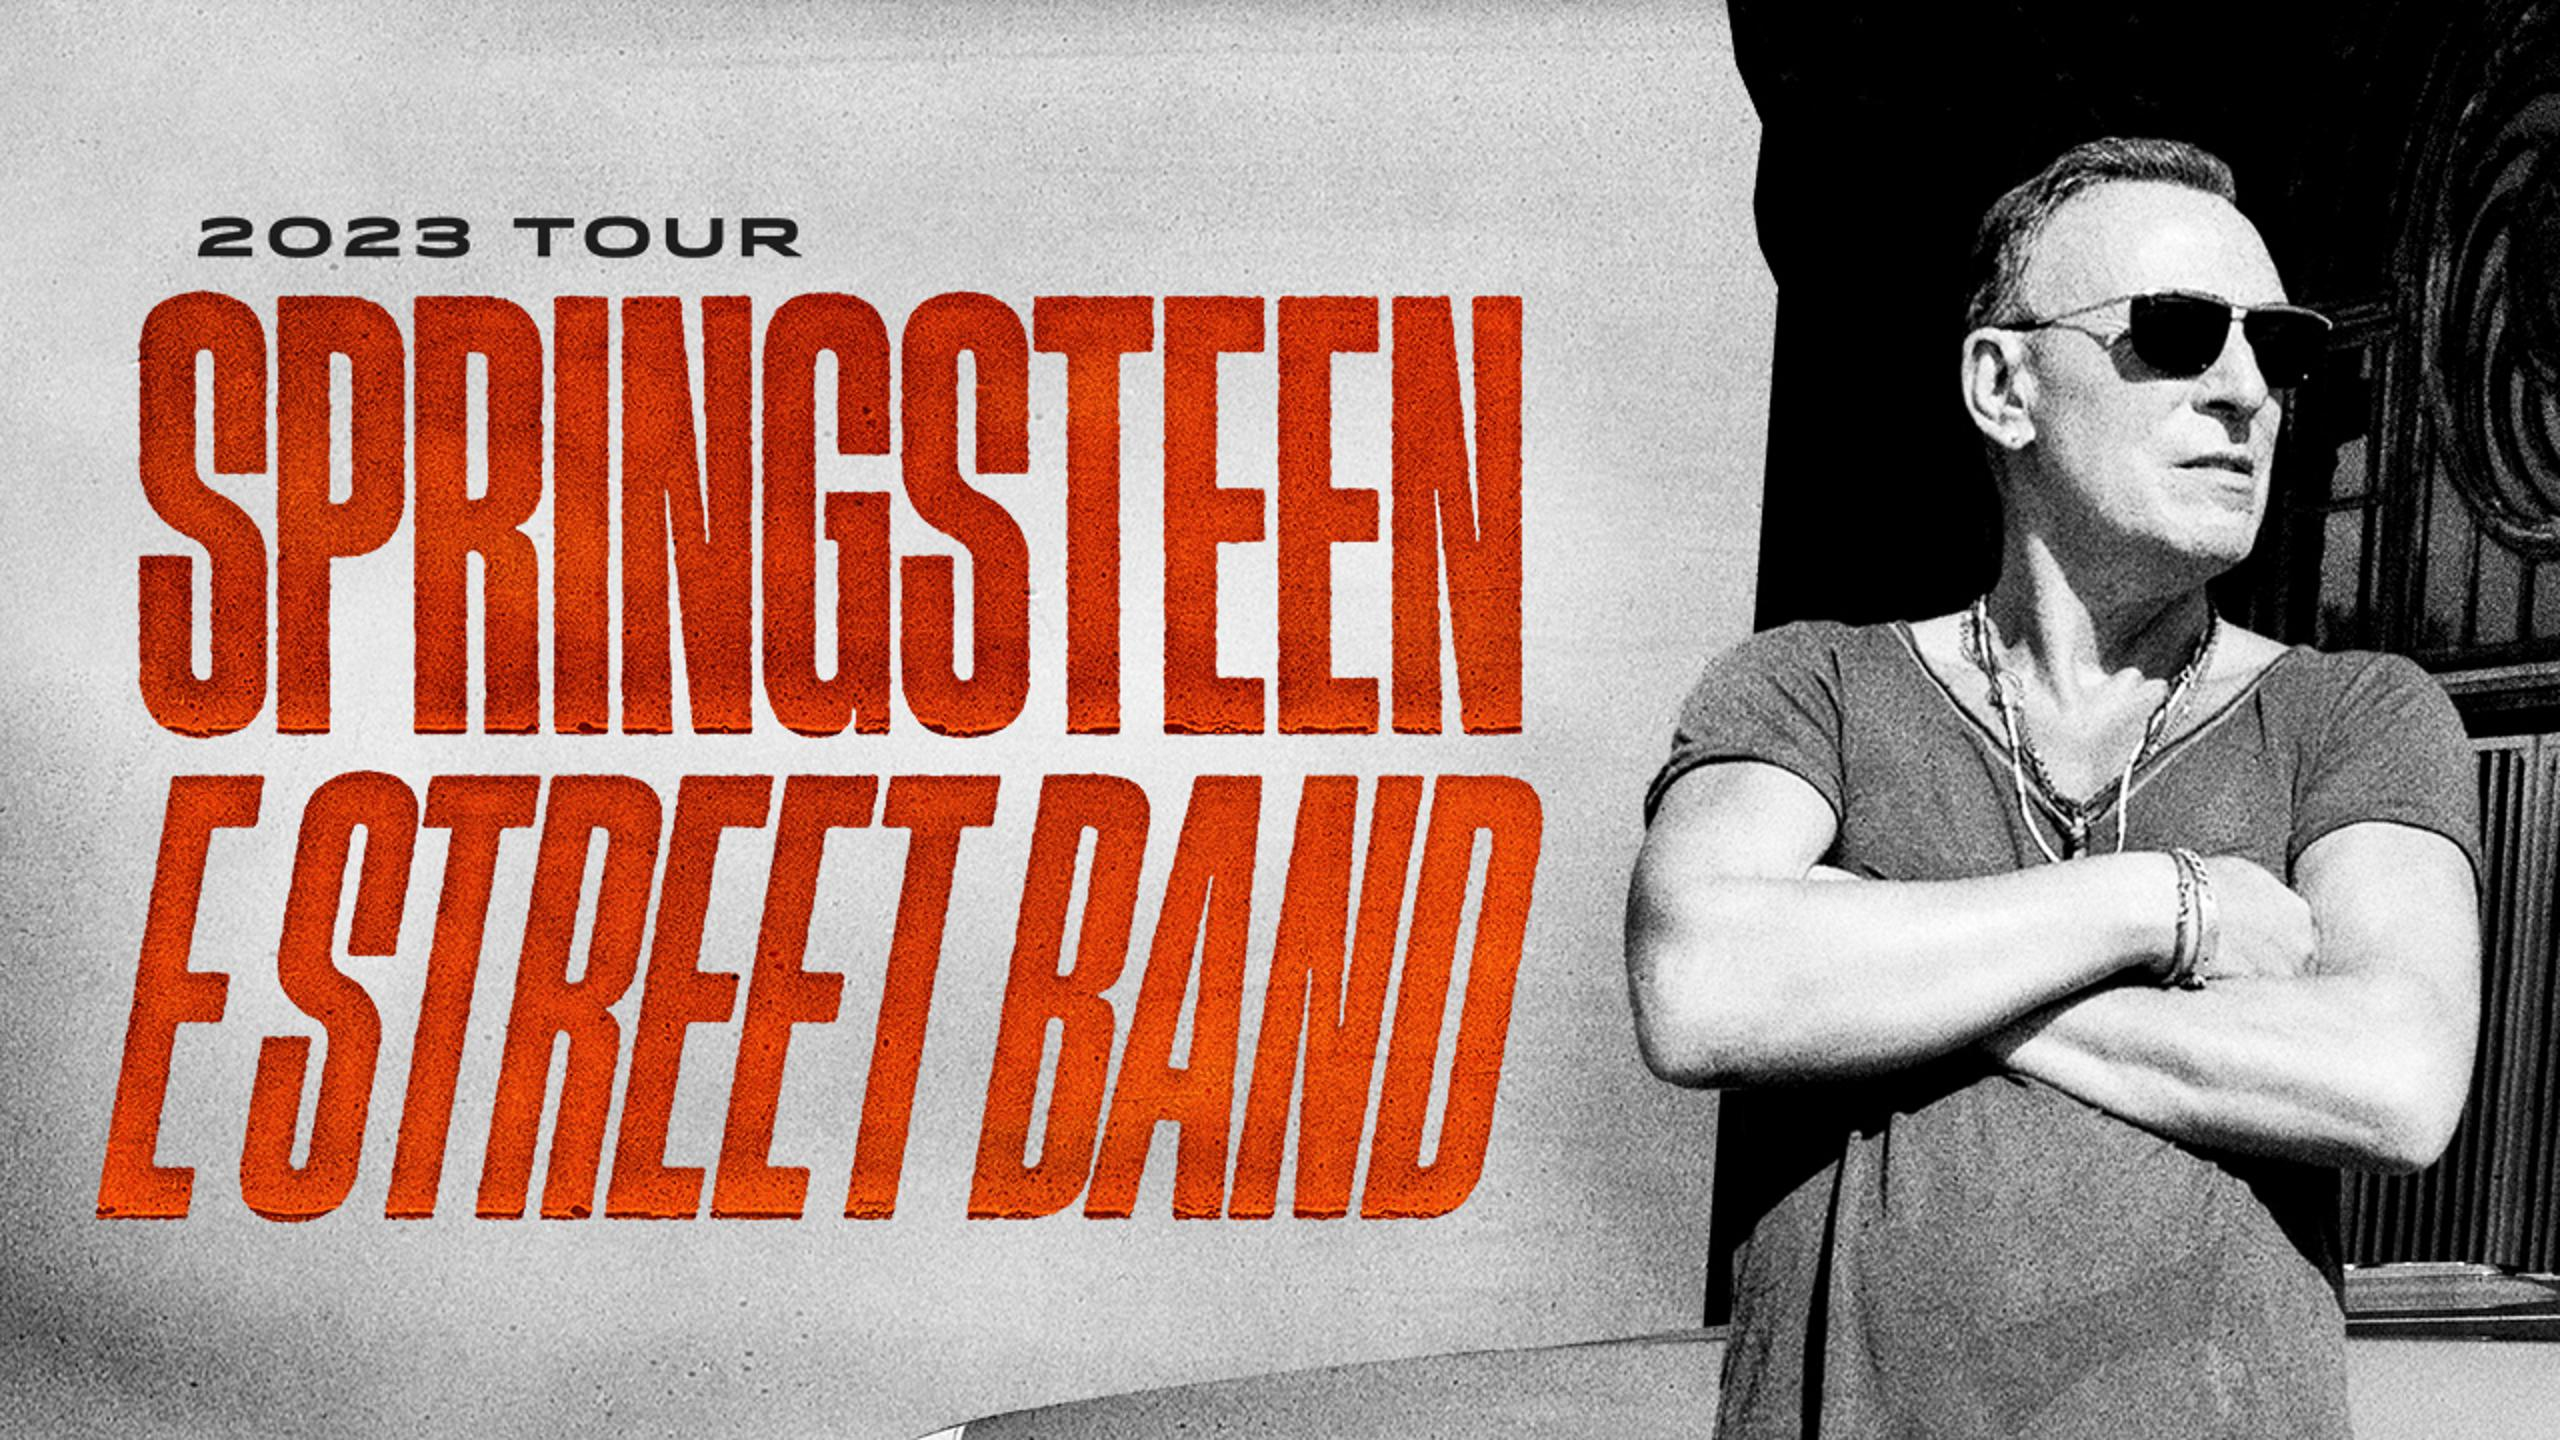 2560x1440 Bruce Springsteen concert tickets for Olympiastadion M&Atilde;&frac14;nchen, M&Atilde;&frac14;nchen Sunday, 23 July 2023 | Wegow Swede